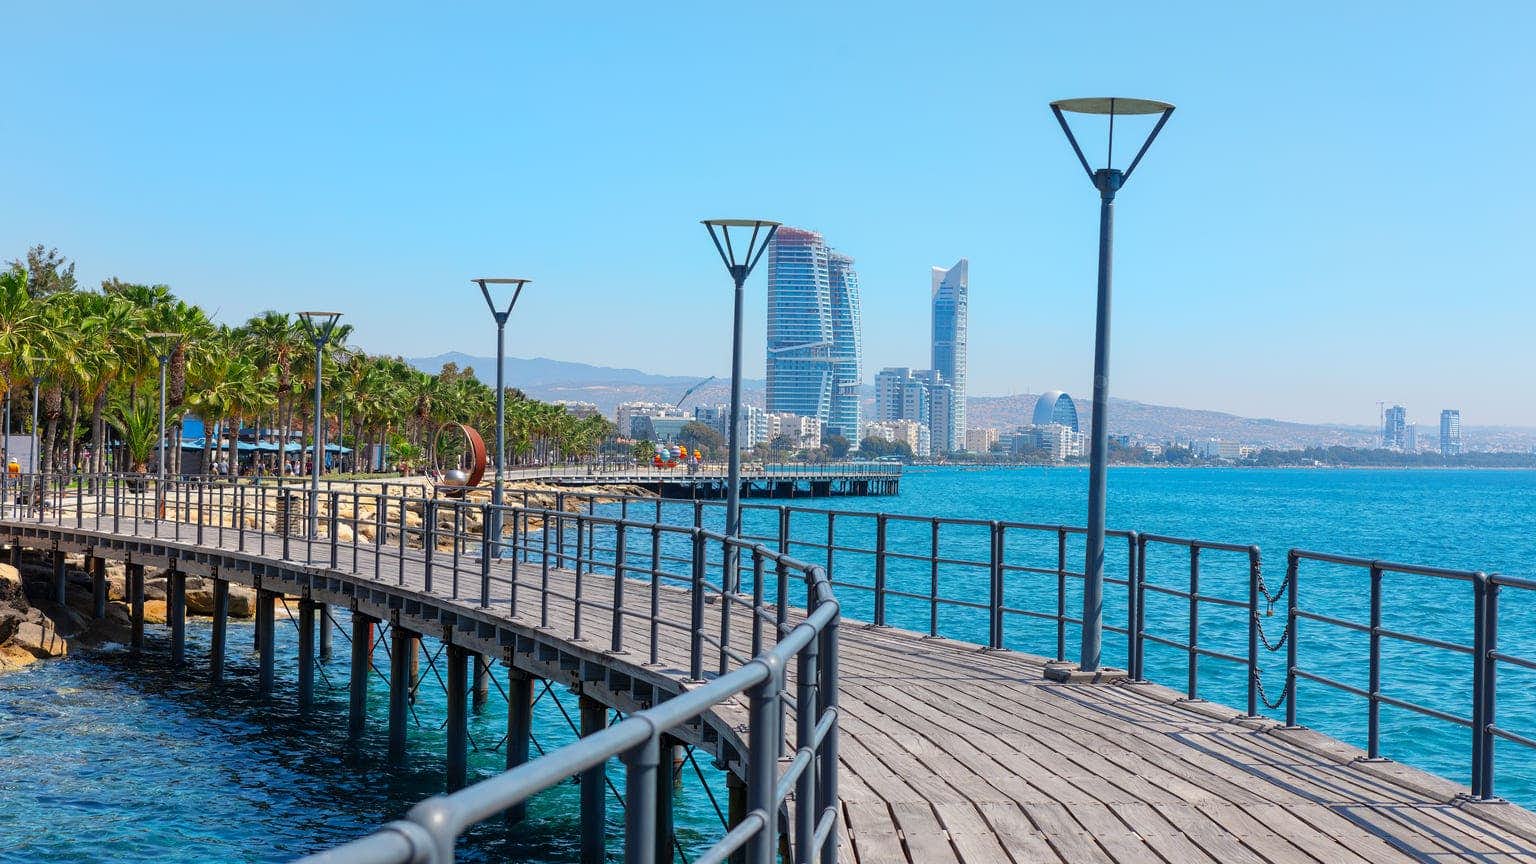 Obtaining Cyprus permanent residence by investment: all options and step-by-step guide